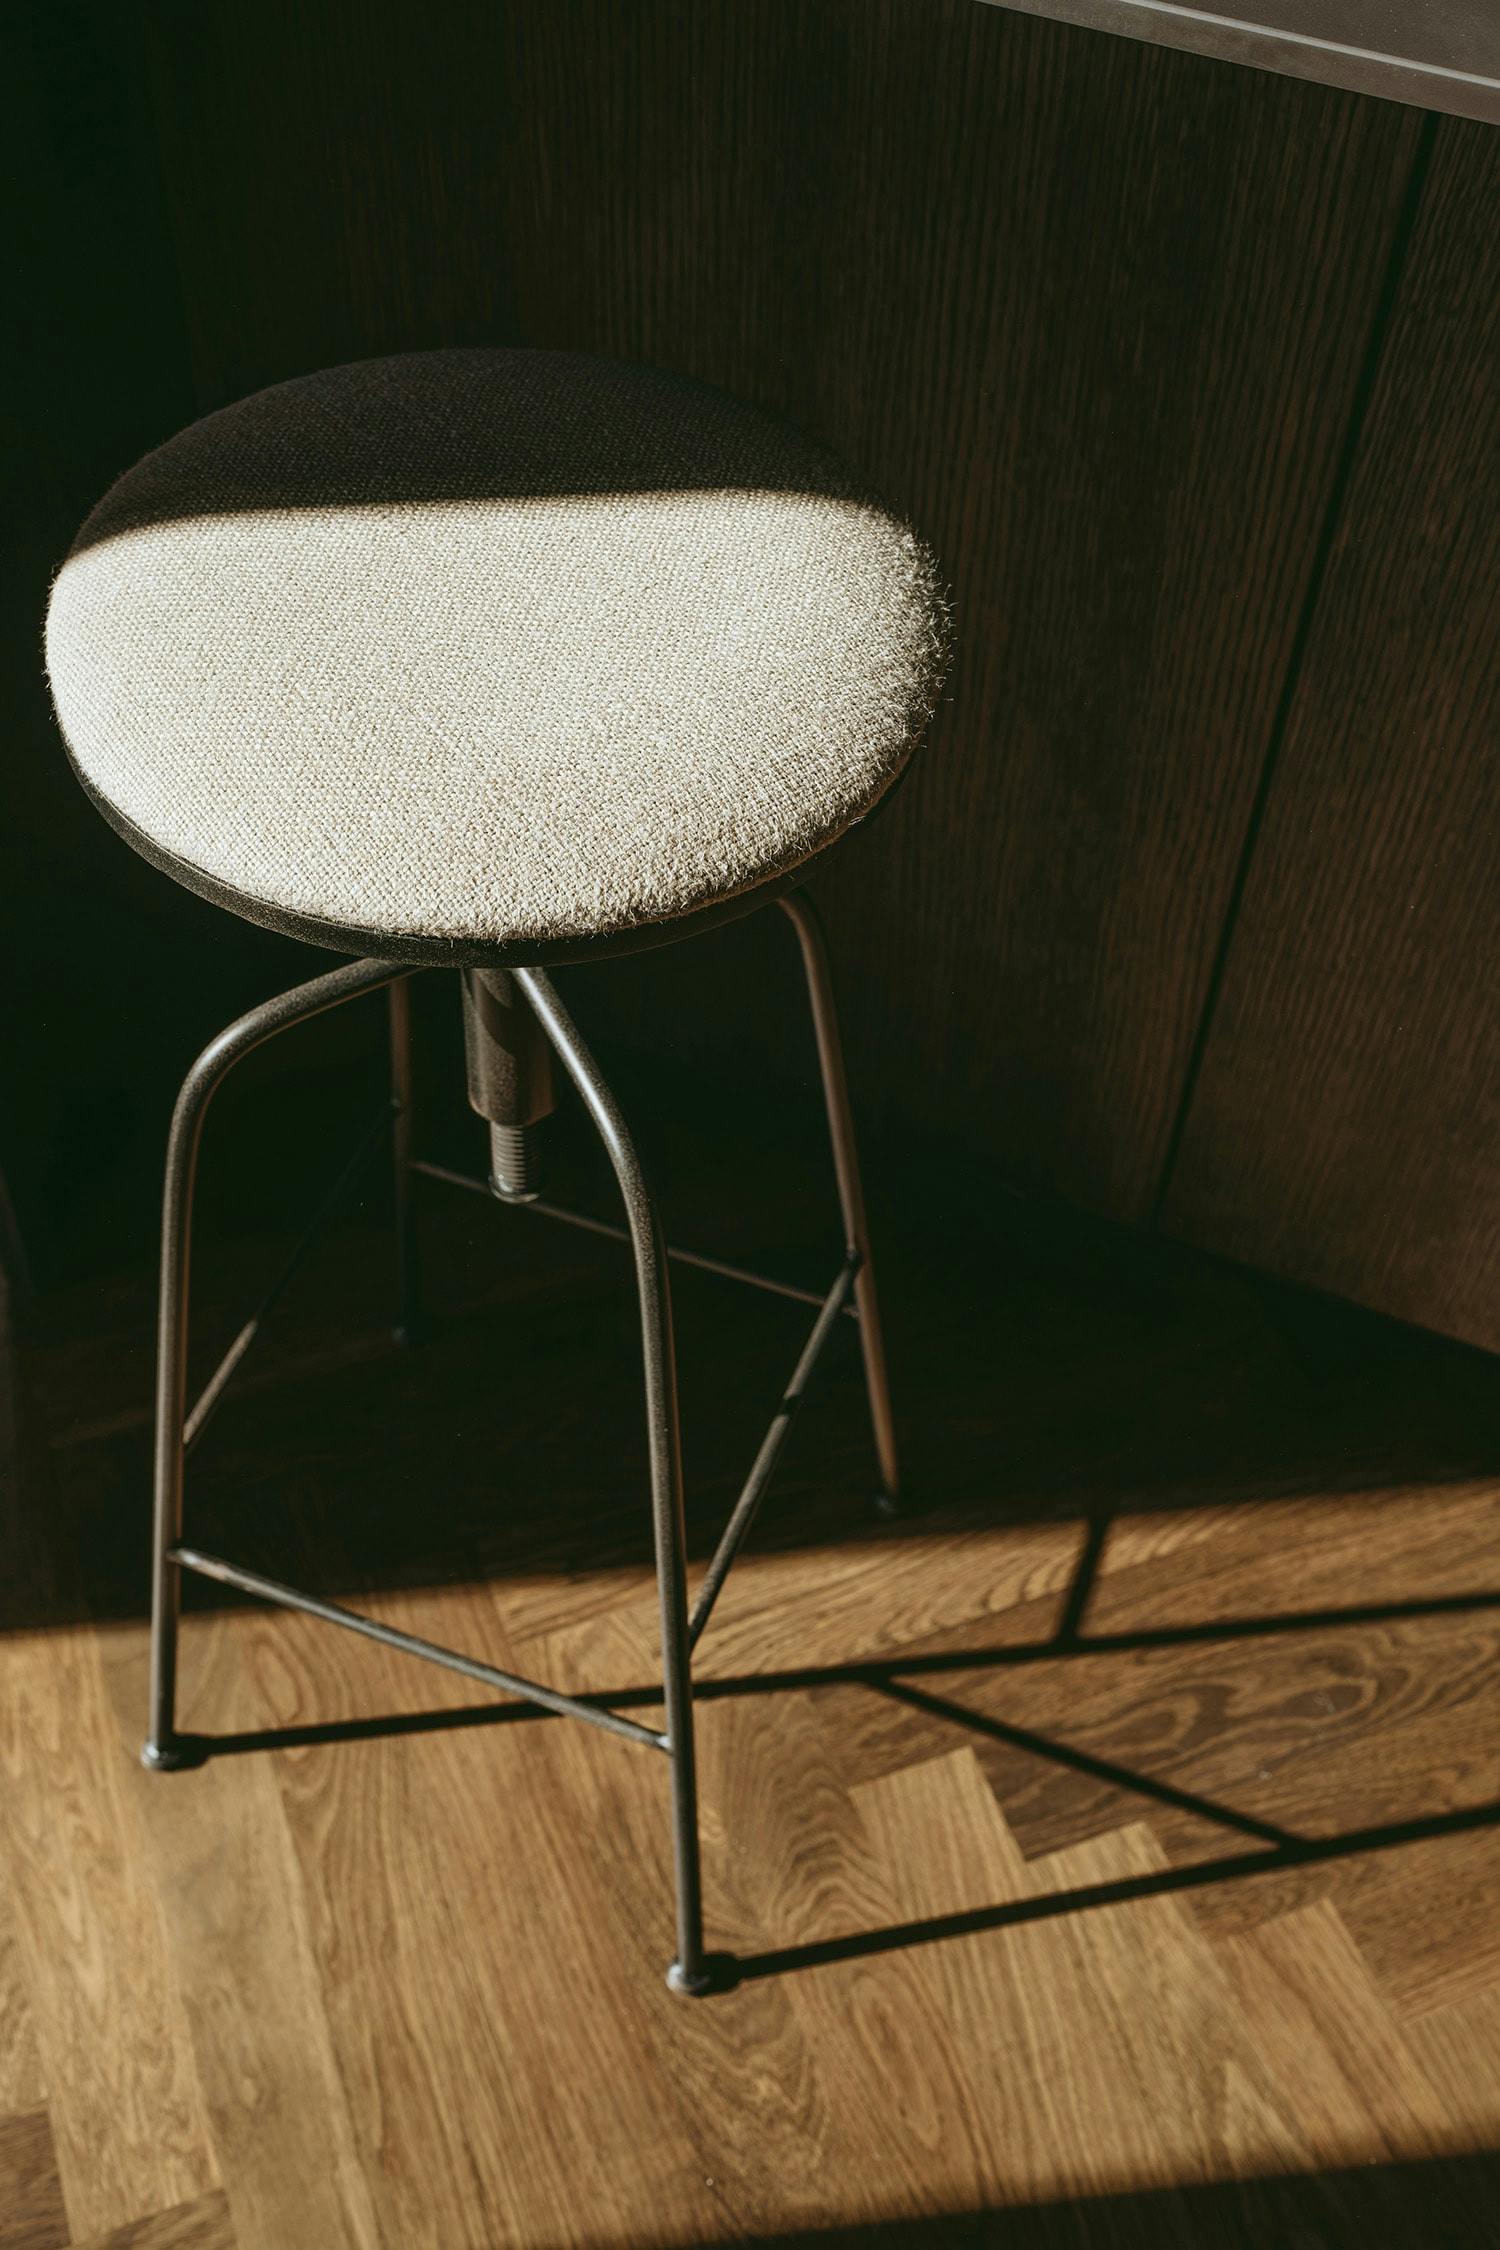 A white chair is placed on a hardwood floor in a room with a wooden floor, creating a contrast between the chair and the floor.